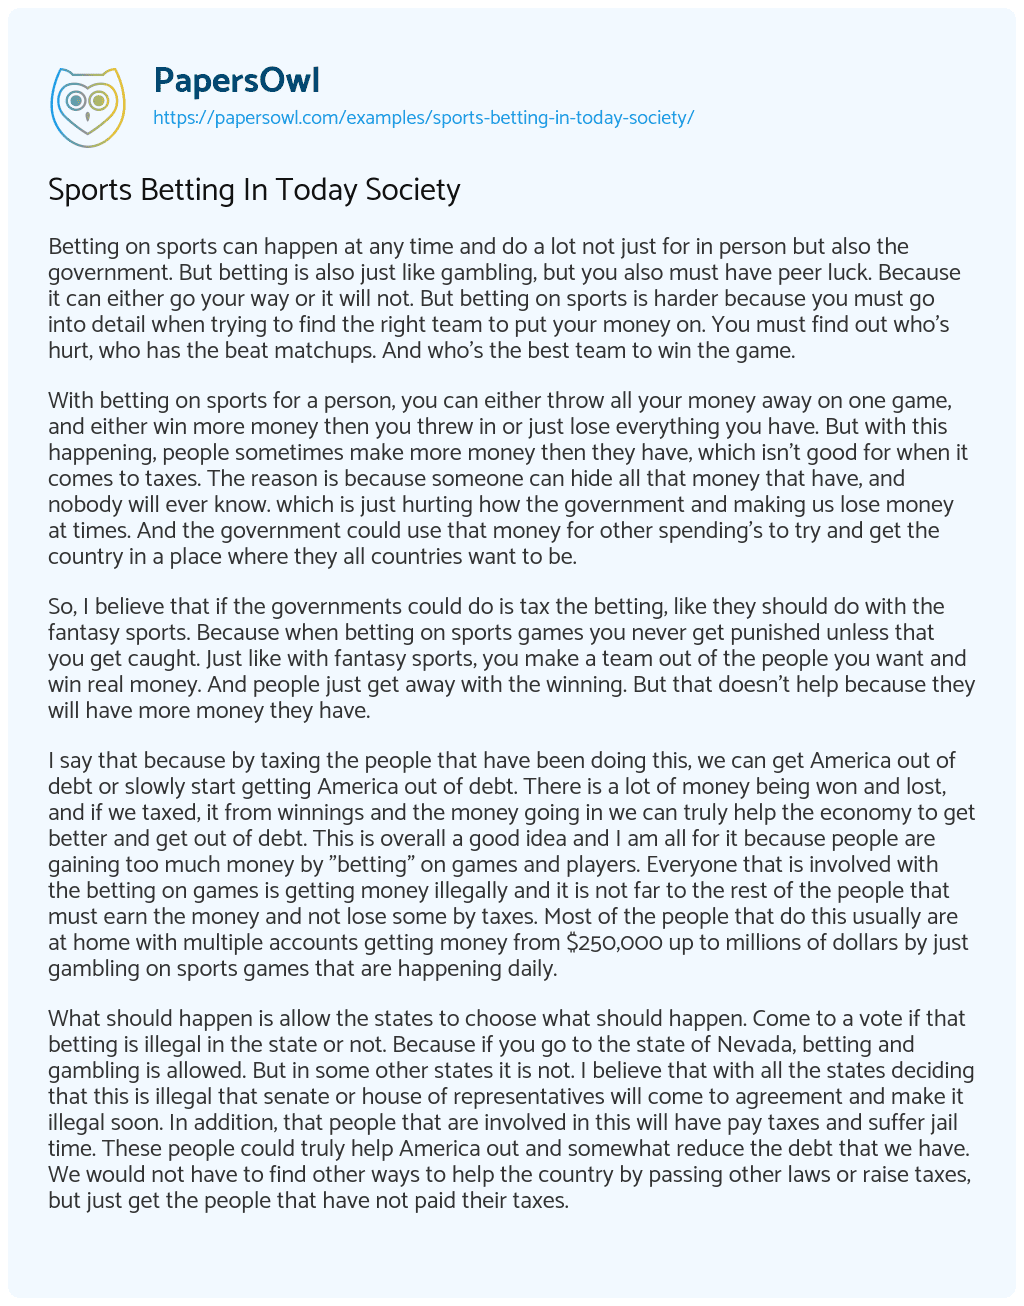 Essay on Sports Betting in Today Society